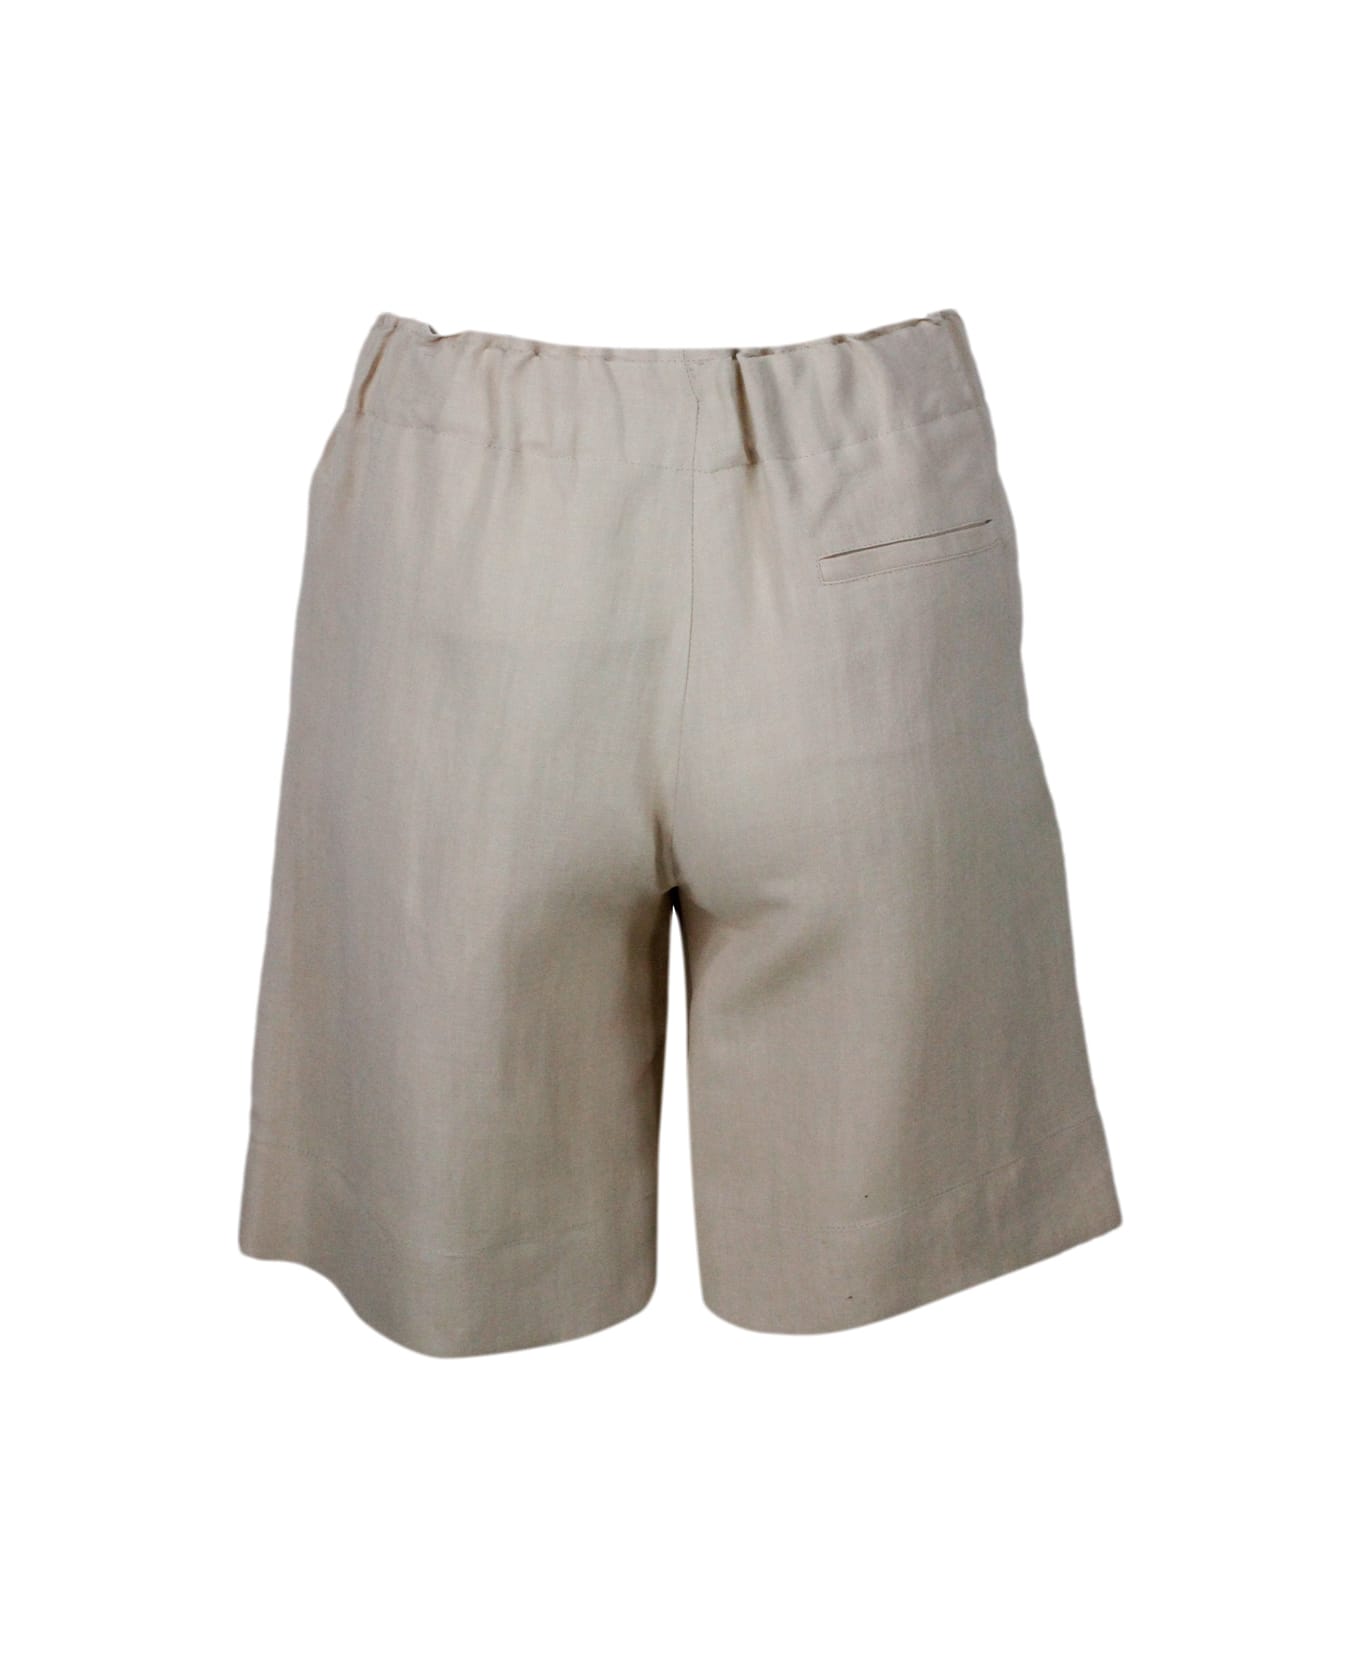 Antonelli Knee-length Bermuda Shorts In Linen Blend With Small Darts And Elasticated Waist